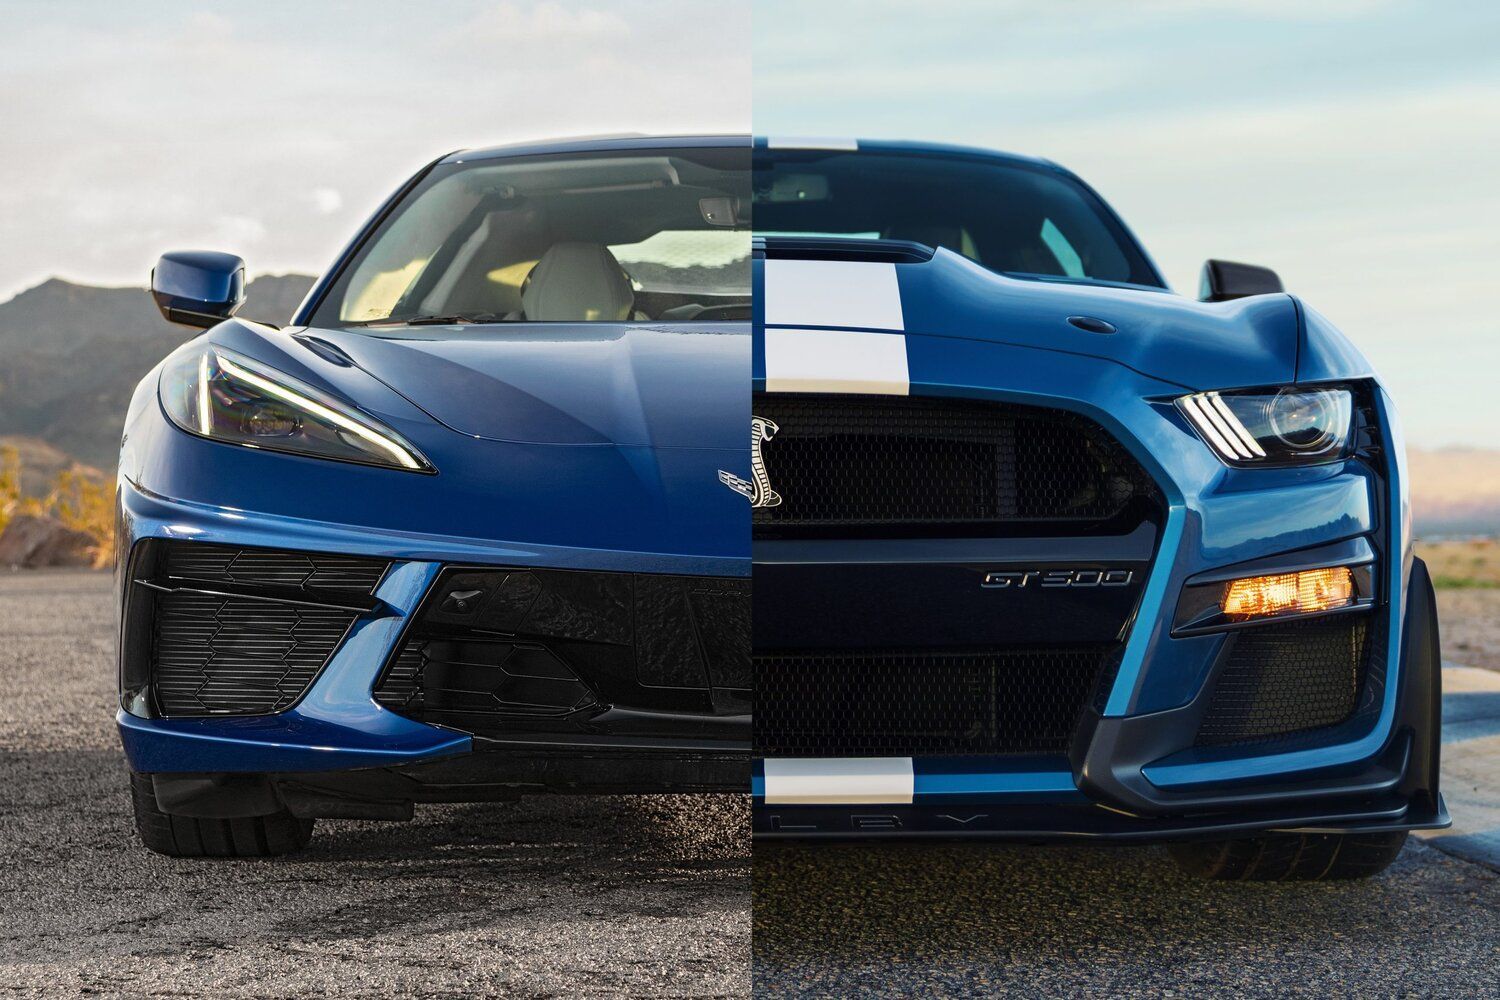 Ford Mustang Vs Chevrolet Corvette: Which Is The True American Icon